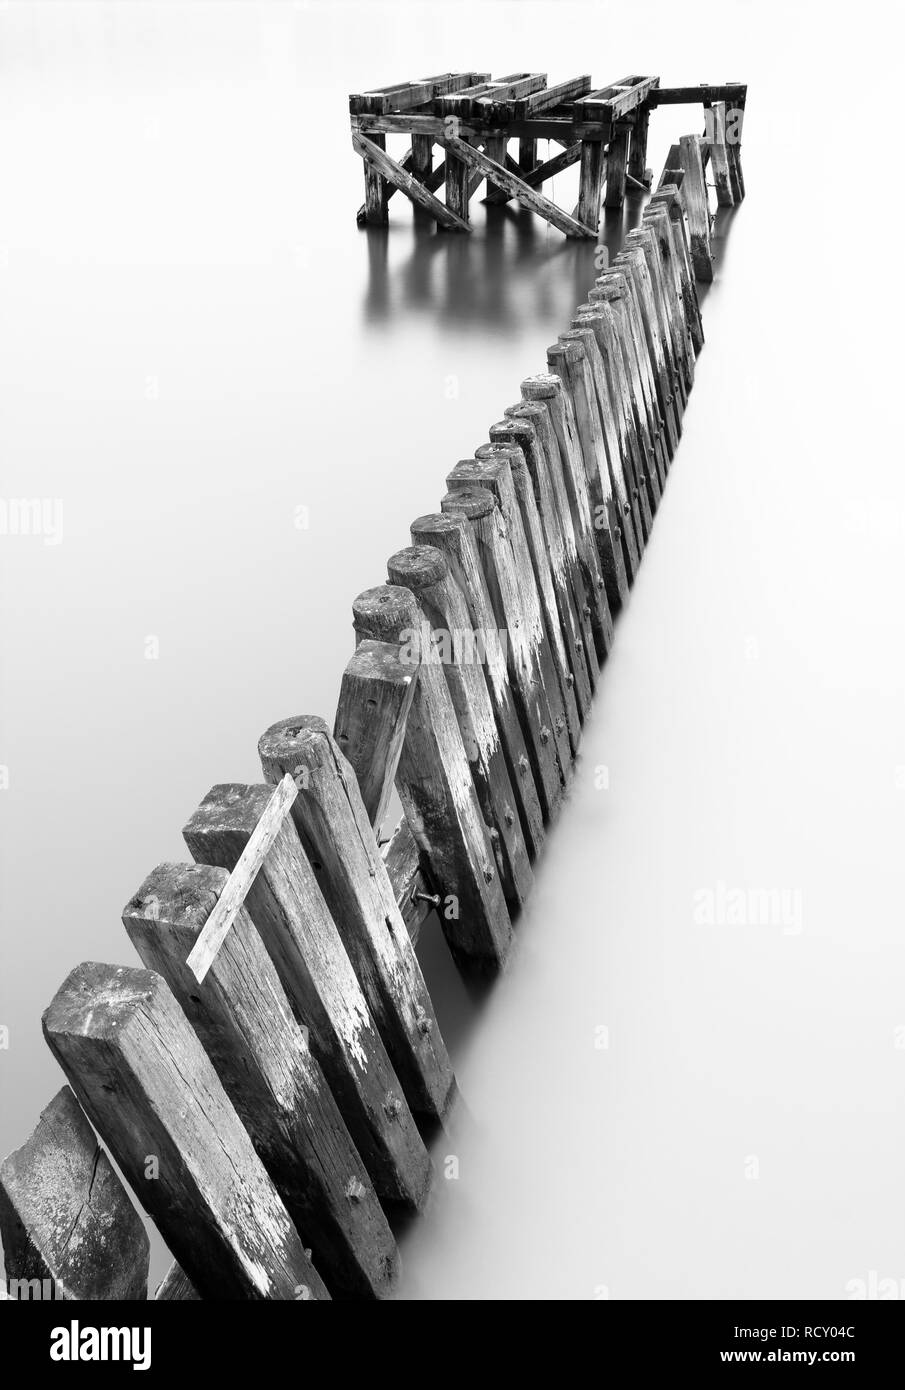 Theres many old remains of the wooden piers in the River Tyne and many of them have some lovely geometric forms. Using a long exposure to soften the w Stock Photo